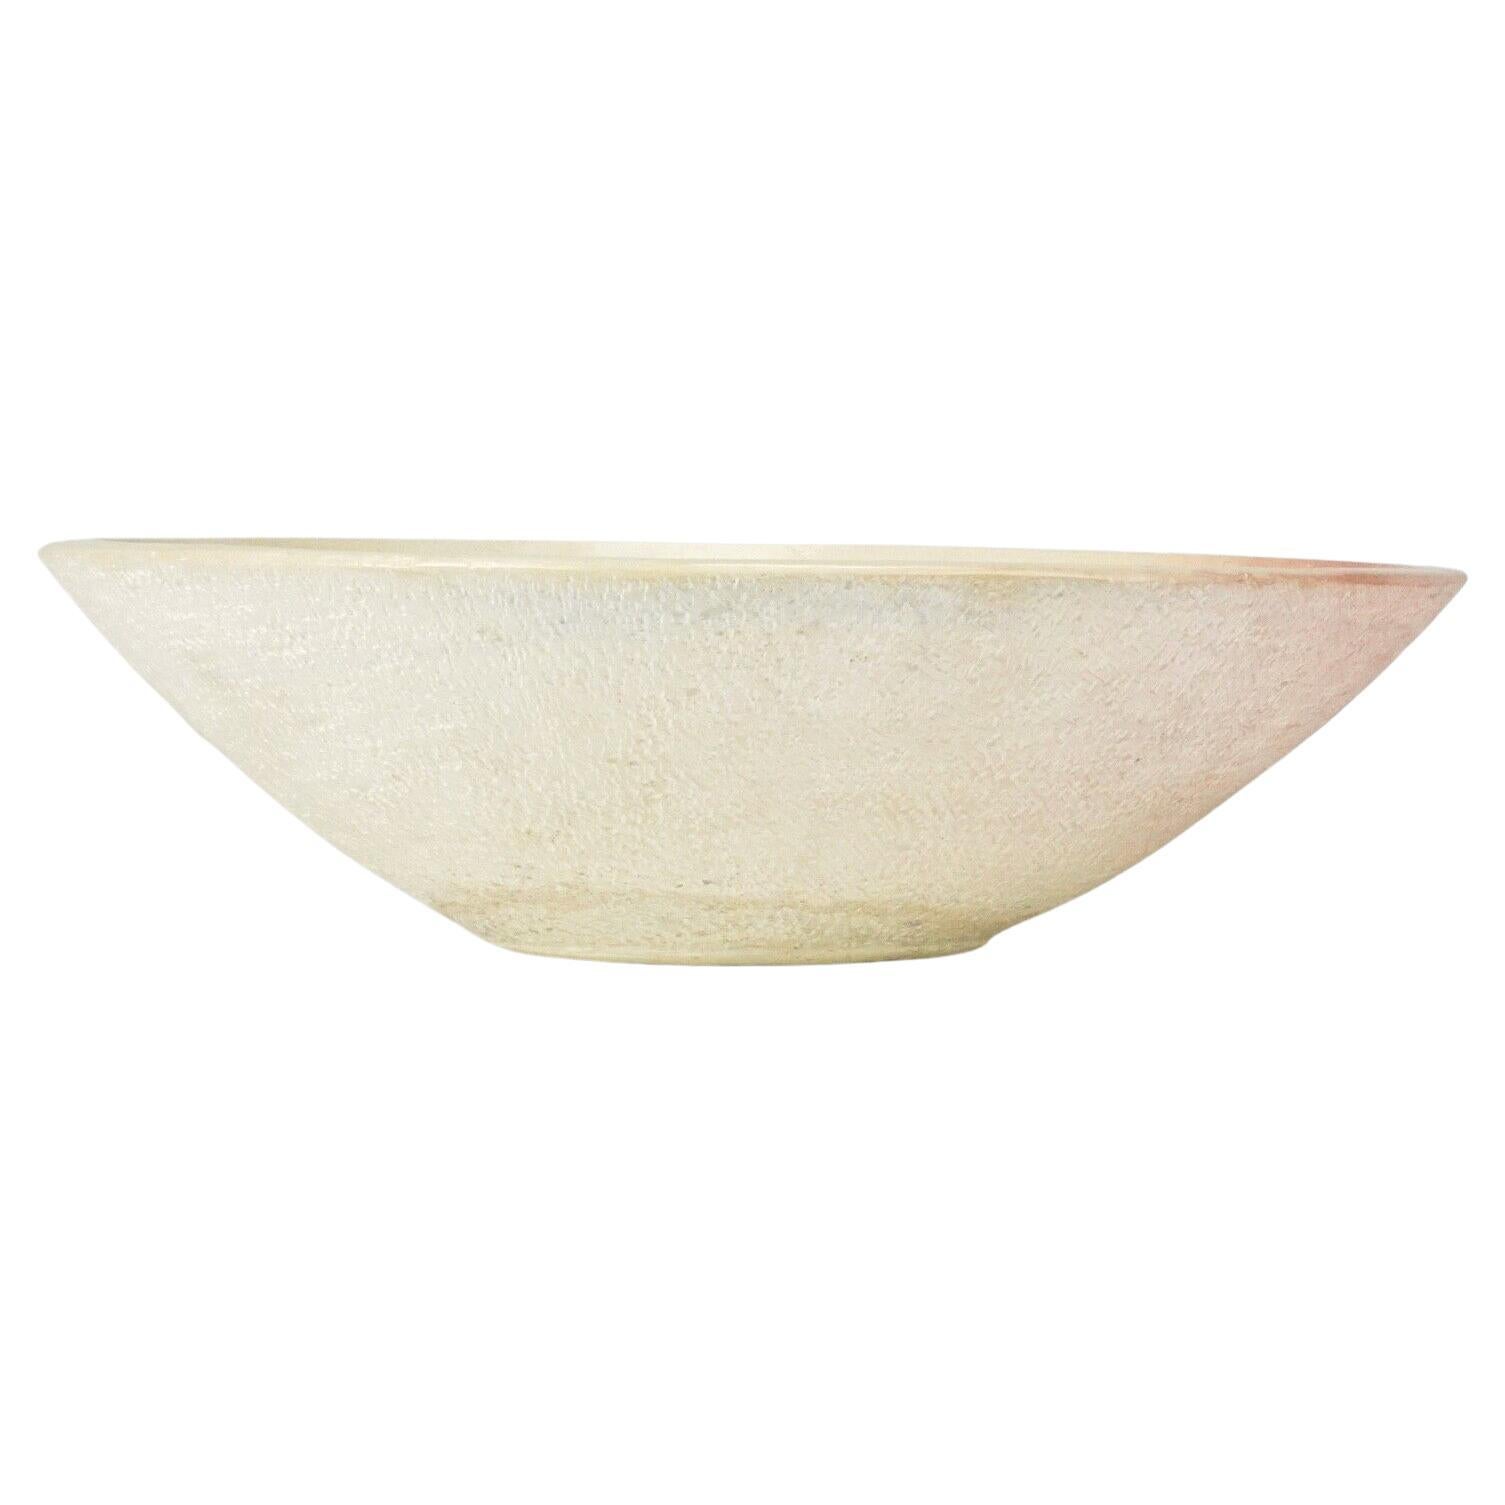 Pink & Cream Marble Stone Bowl For Sale